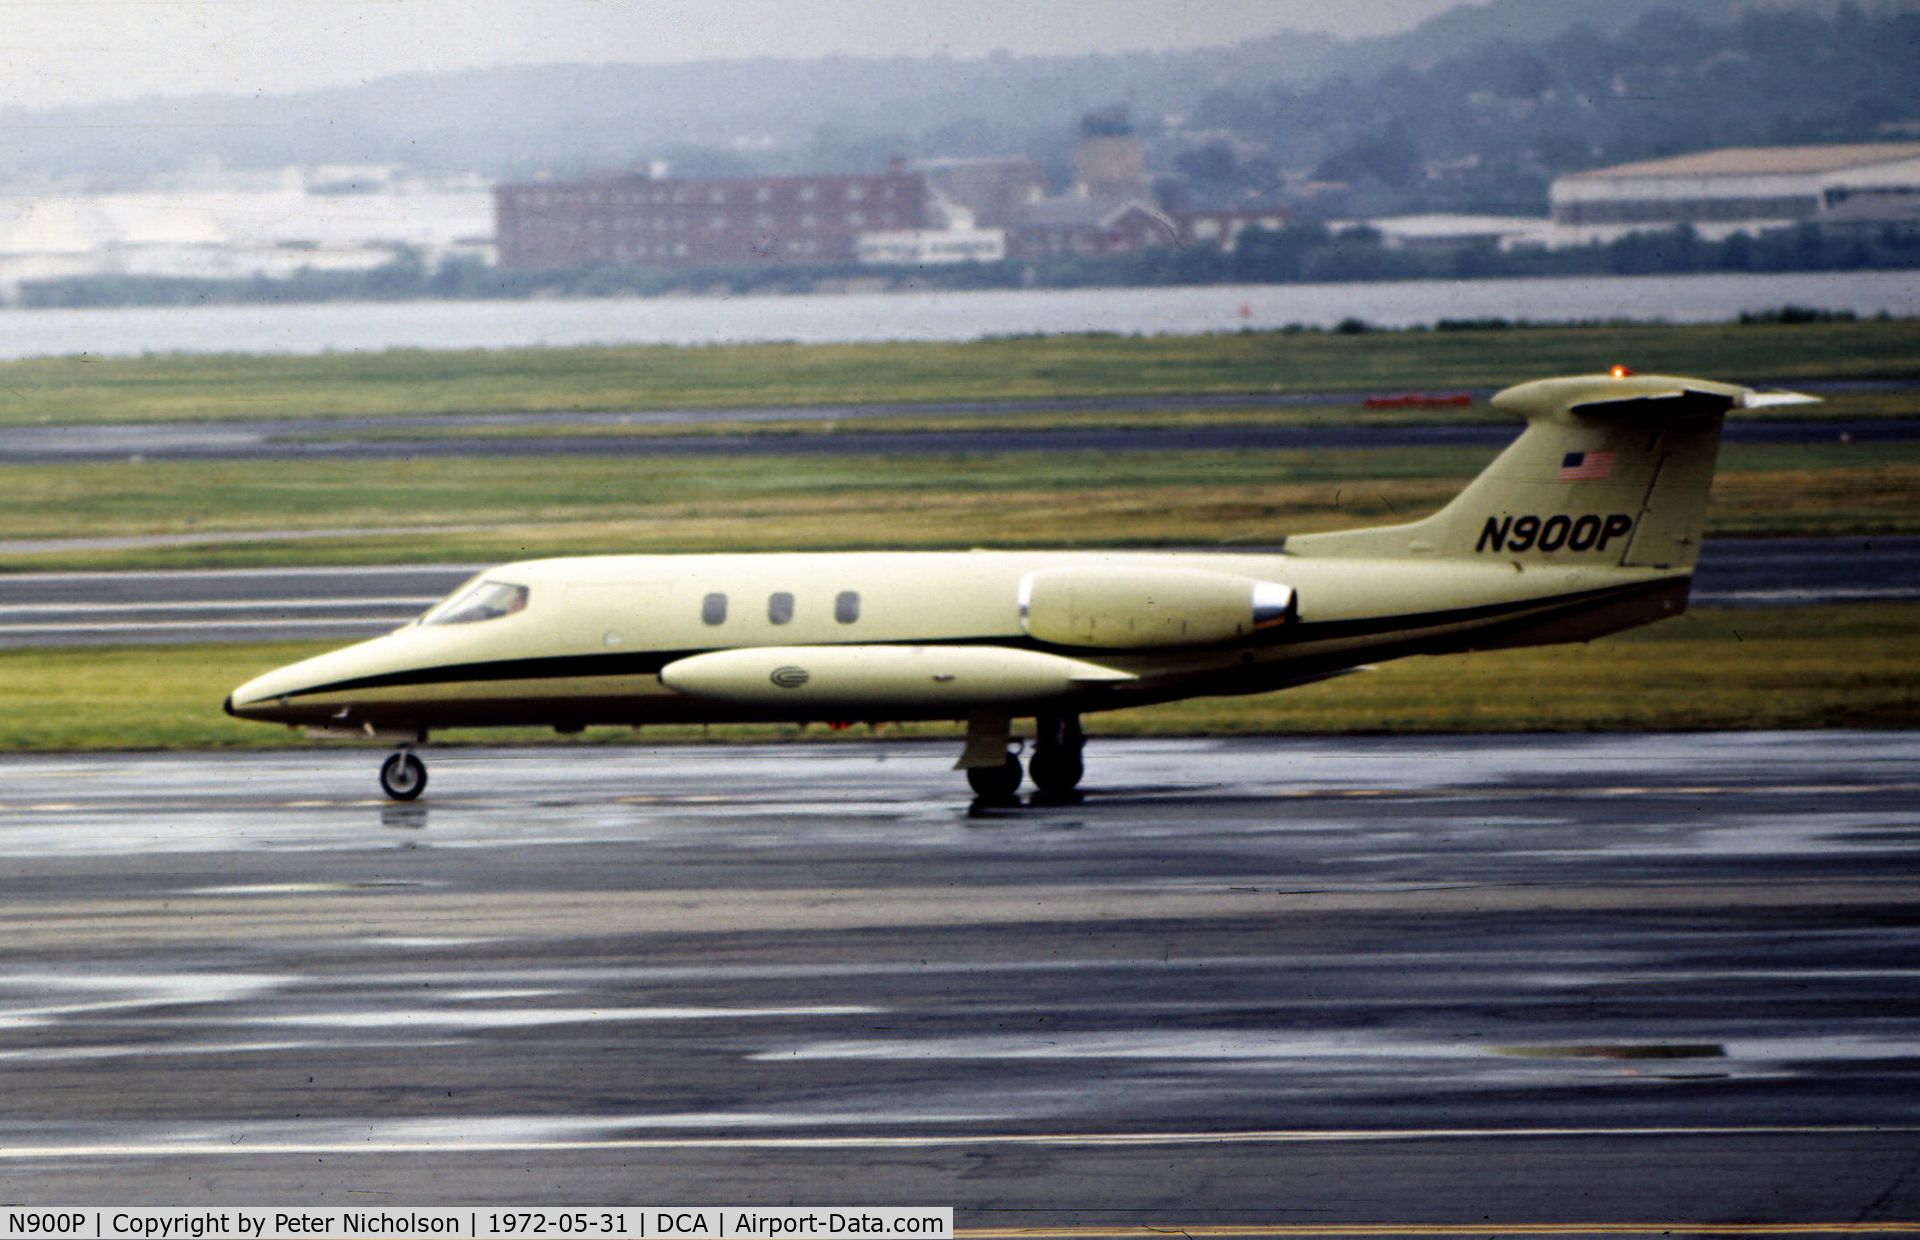 N900P, 1970 Learjet Inc 25 C/N 049, Learjet 25 taxying at what was then known as National Airport in May 1972.